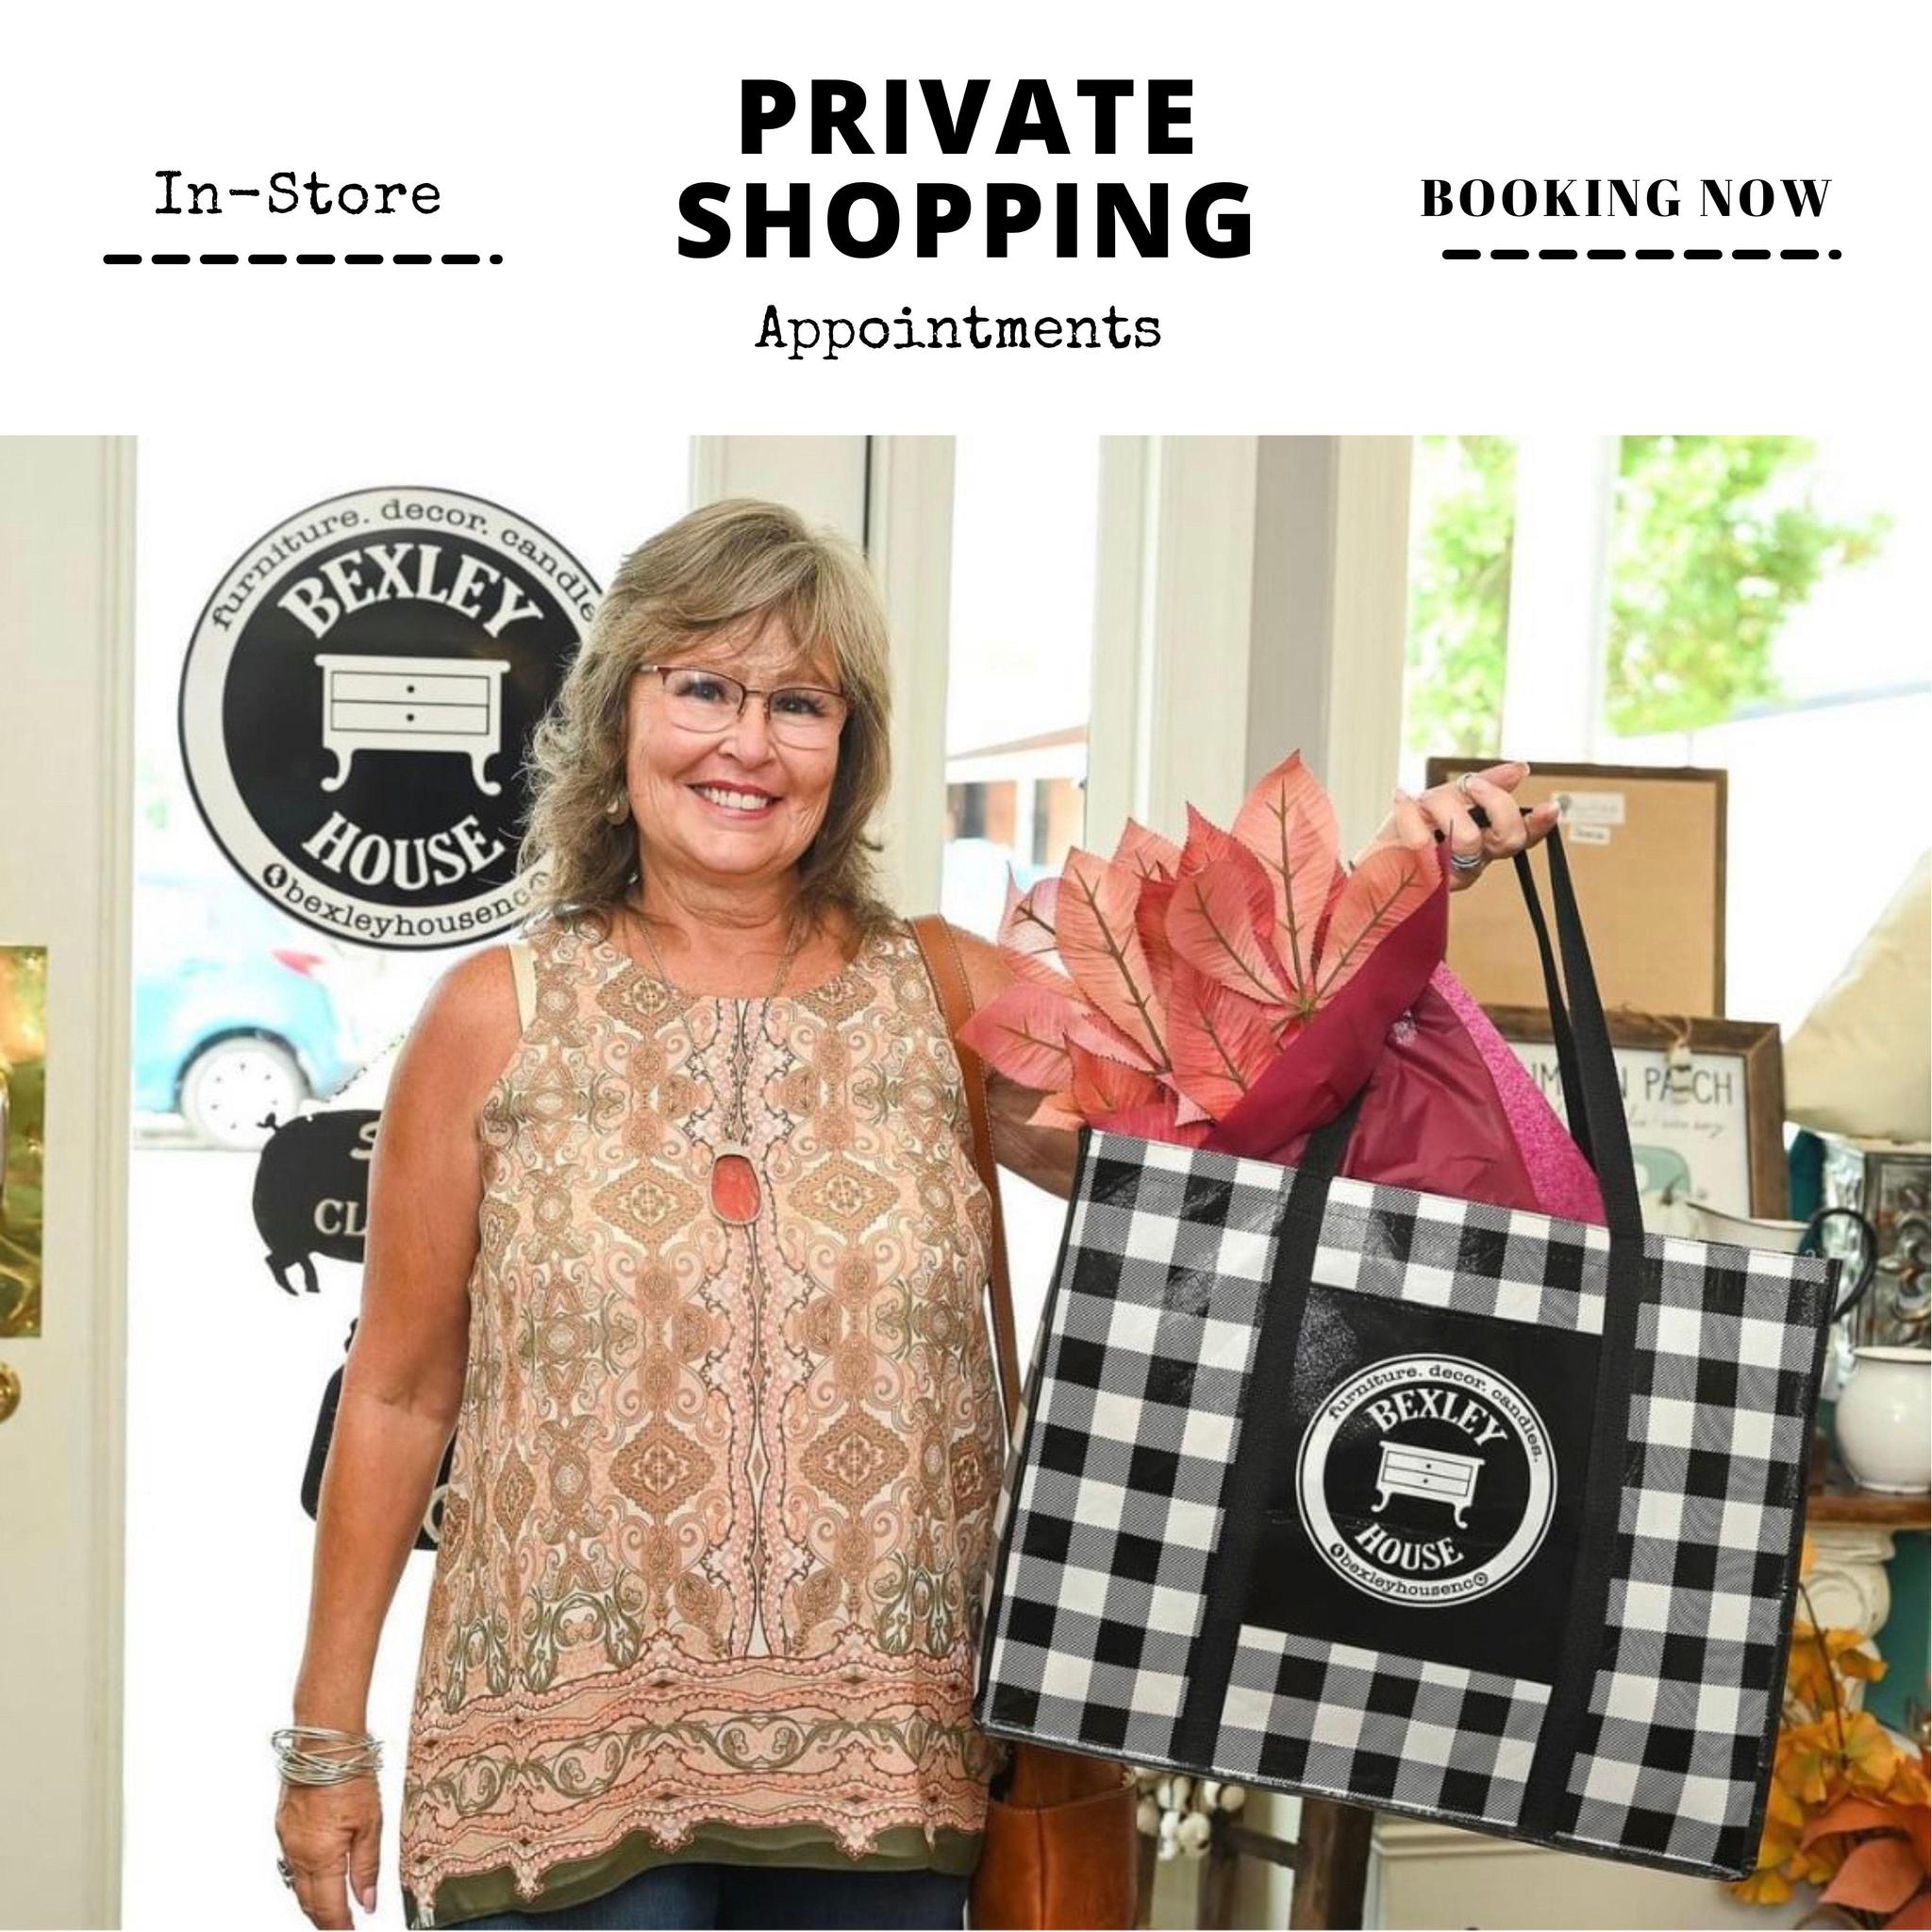 In-Store Private Shopping